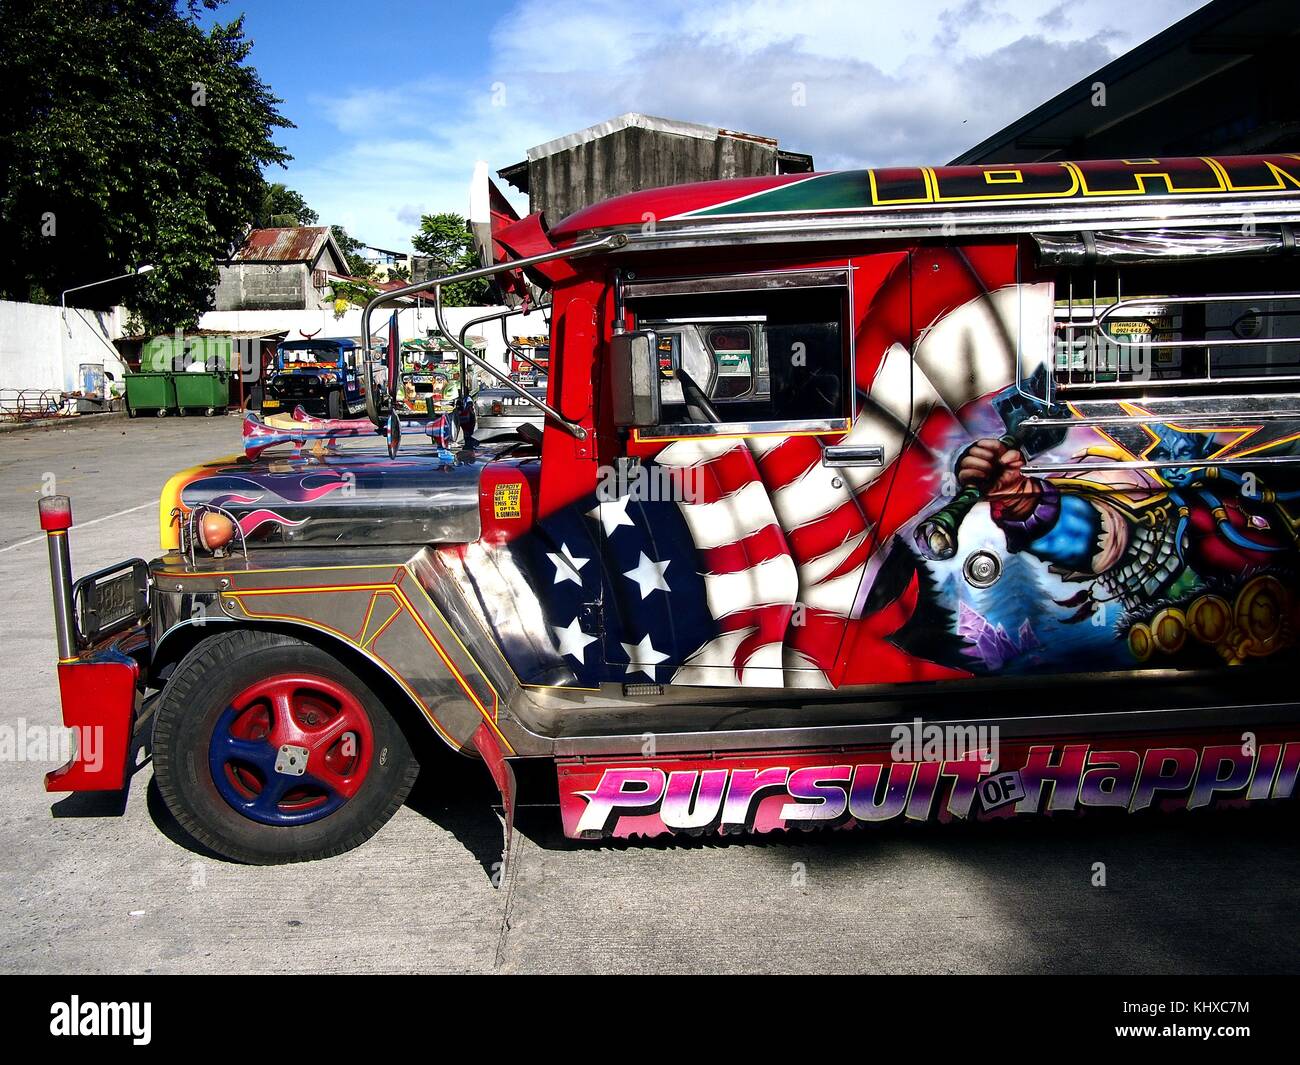 ANTIPOLO CITY, PHILIPPINES - NOVEMBER 15, 2017: Colorful passenger jeepneys with artistic designs at a jeepney parking lot. Stock Photo